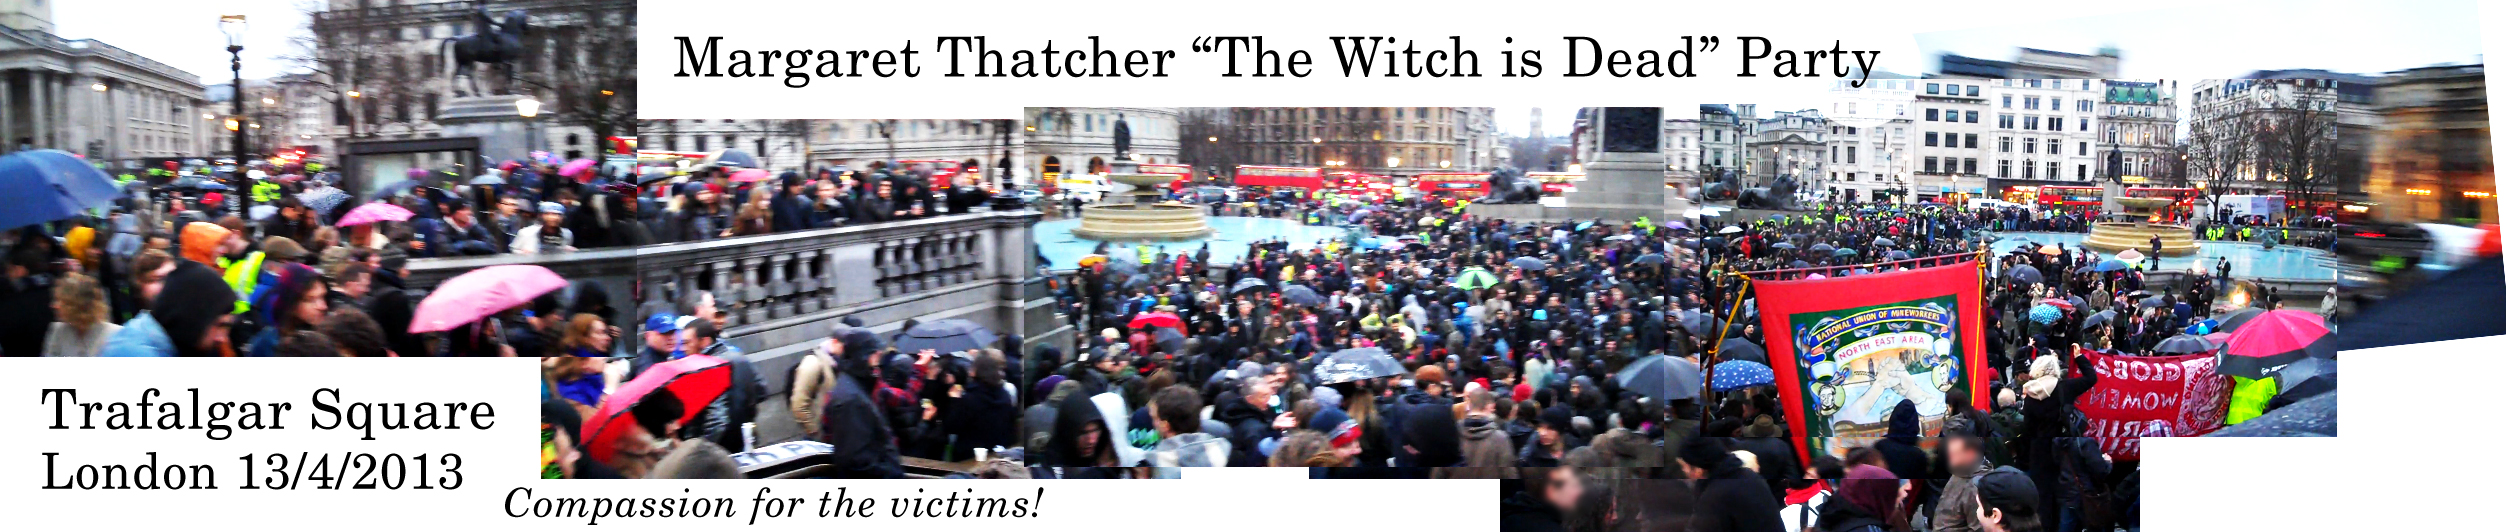 Trafalgar Square Thatcher Death Party panoramic composite photo from 13th April 2013